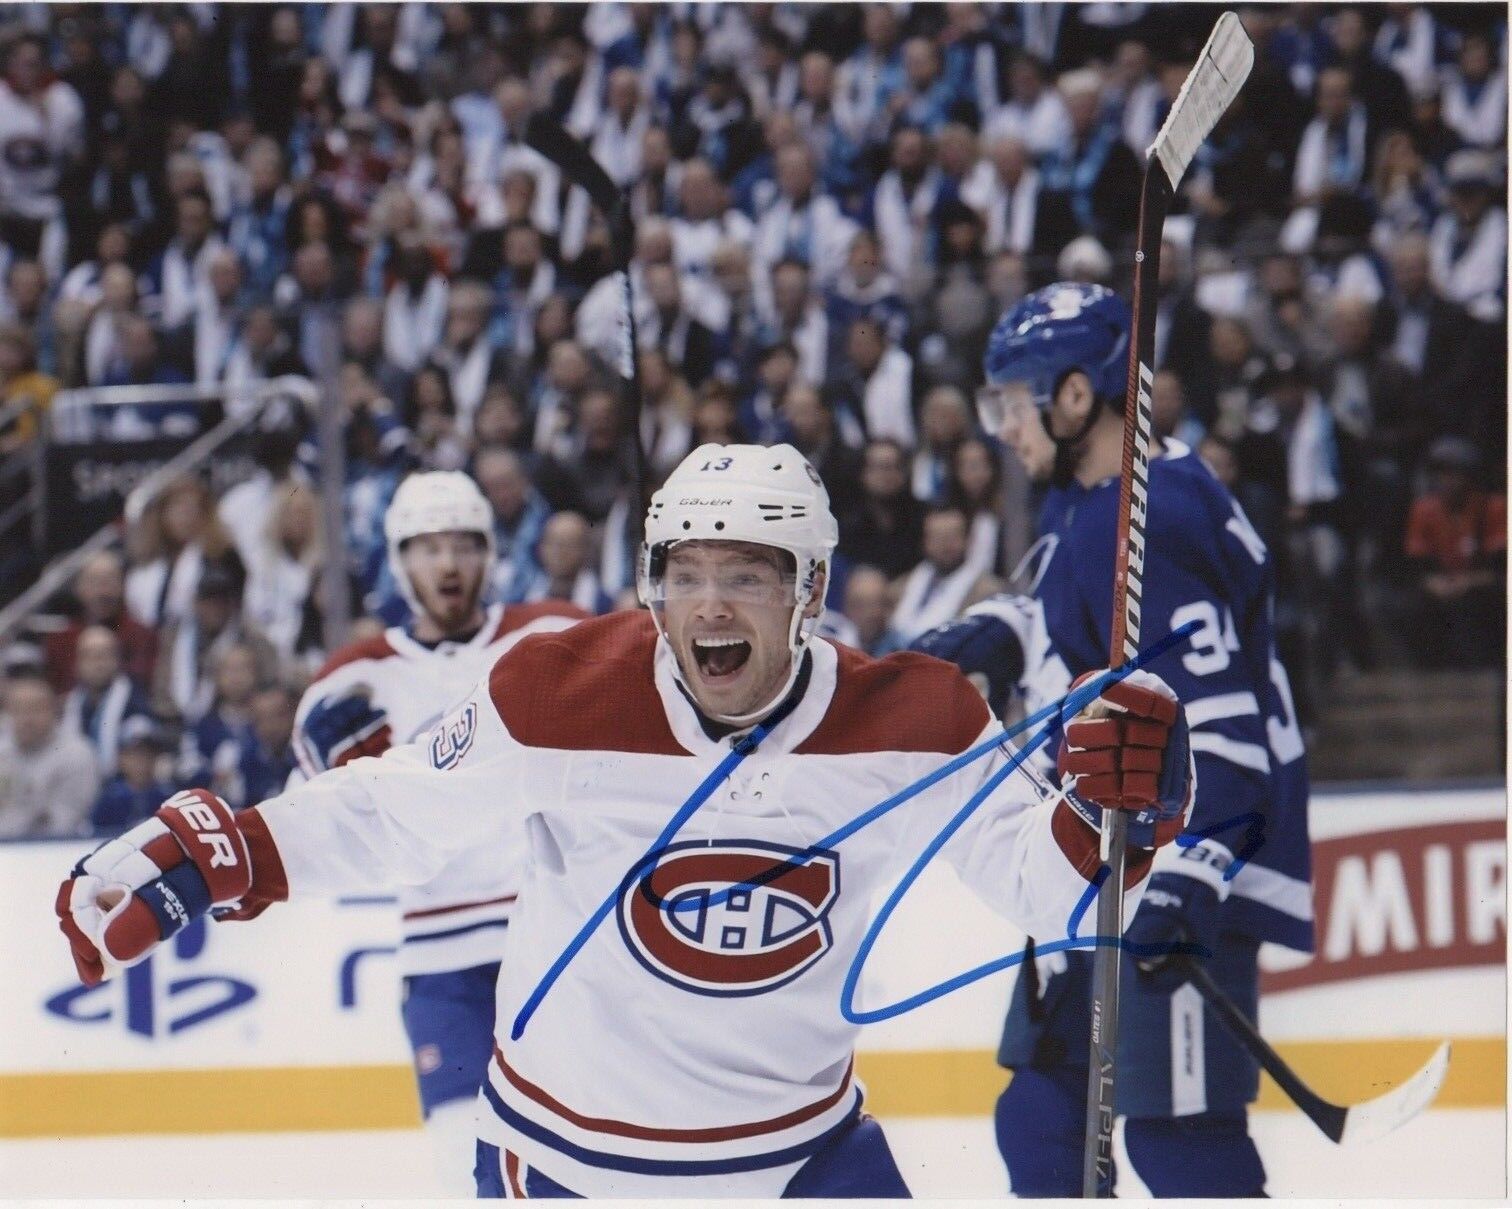 Montreal Canadiens Max Domi Signed Autographed 8x10 NHL Photo Poster painting COA #11